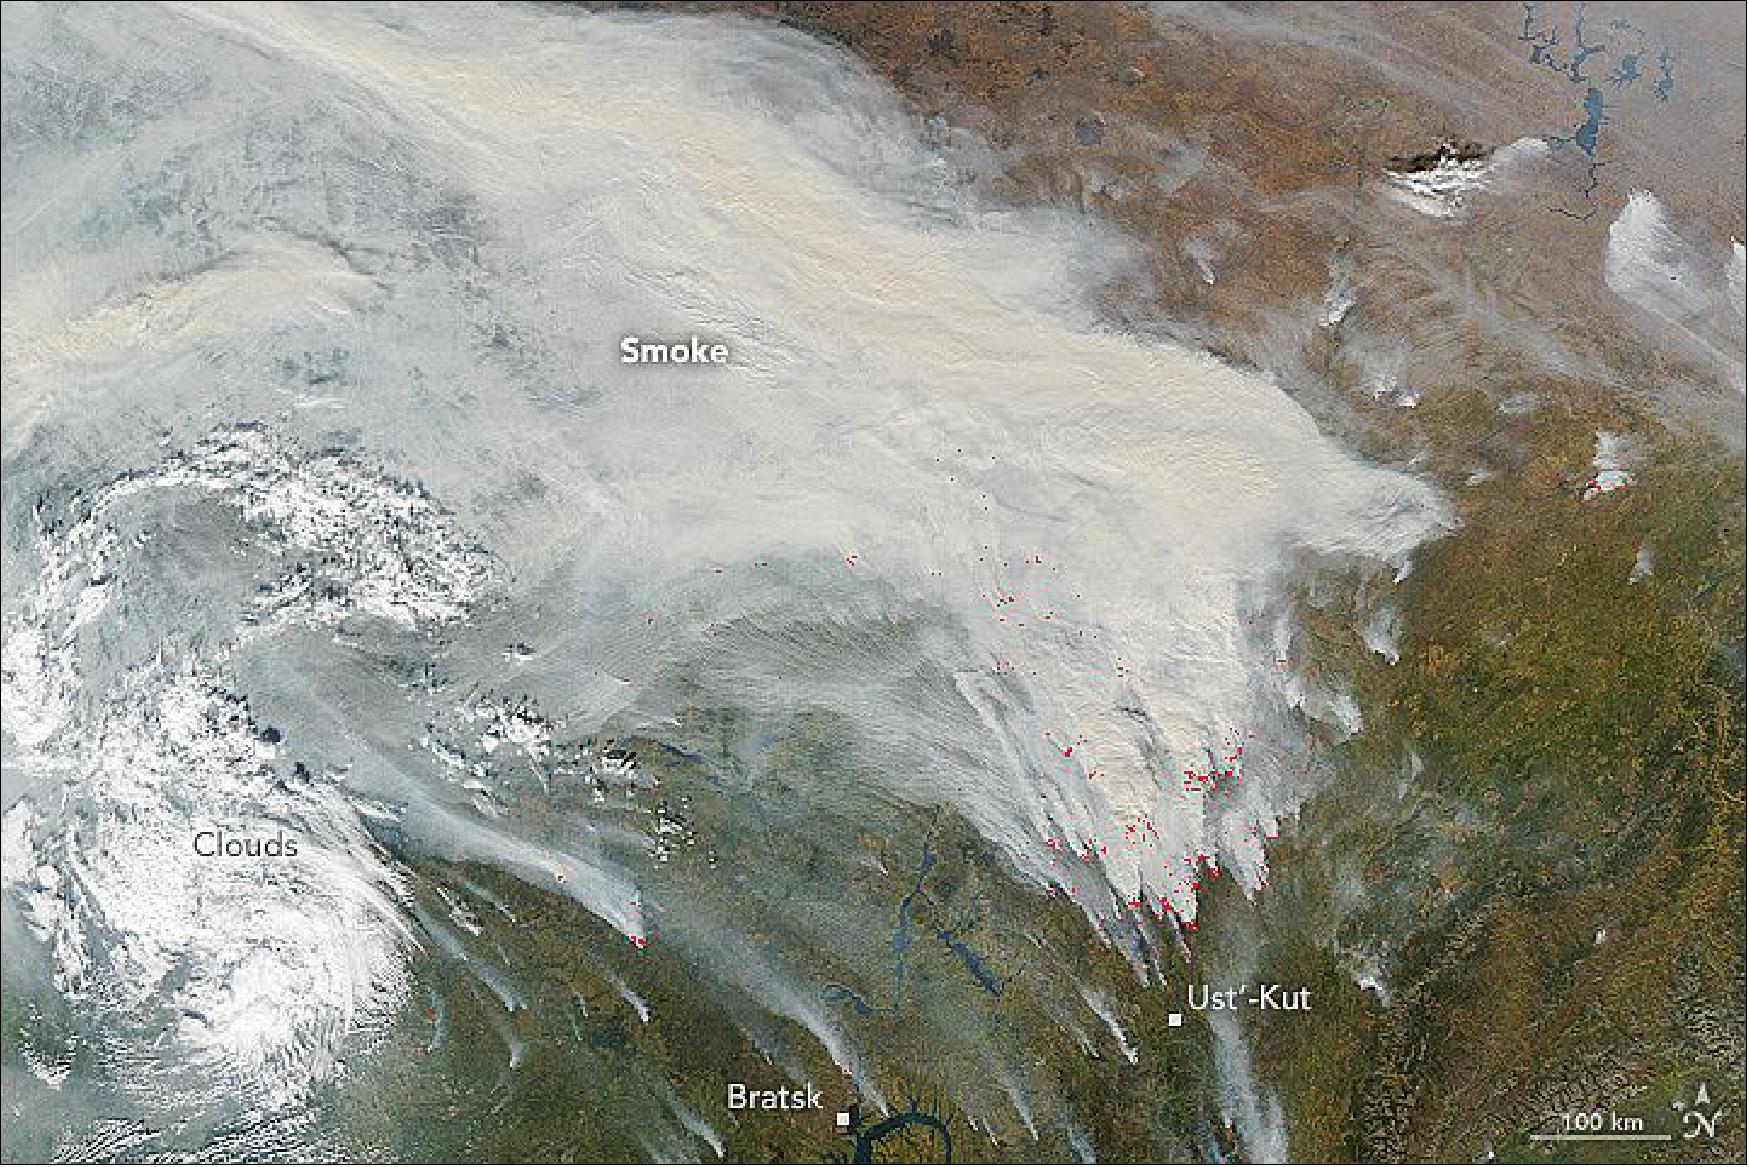 Figure 116: The natural-color image, acquired on Sept. 18, 2016 by the MODIS instrument on NASA’s Aqua satellite, shows huge plumes of smoke streaming toward the northwest. Areas in red show where MODIS detected unusually warm temperatures associated with fire (image credit: NASA Earth Observatory, image by Jeff Schmaltz)